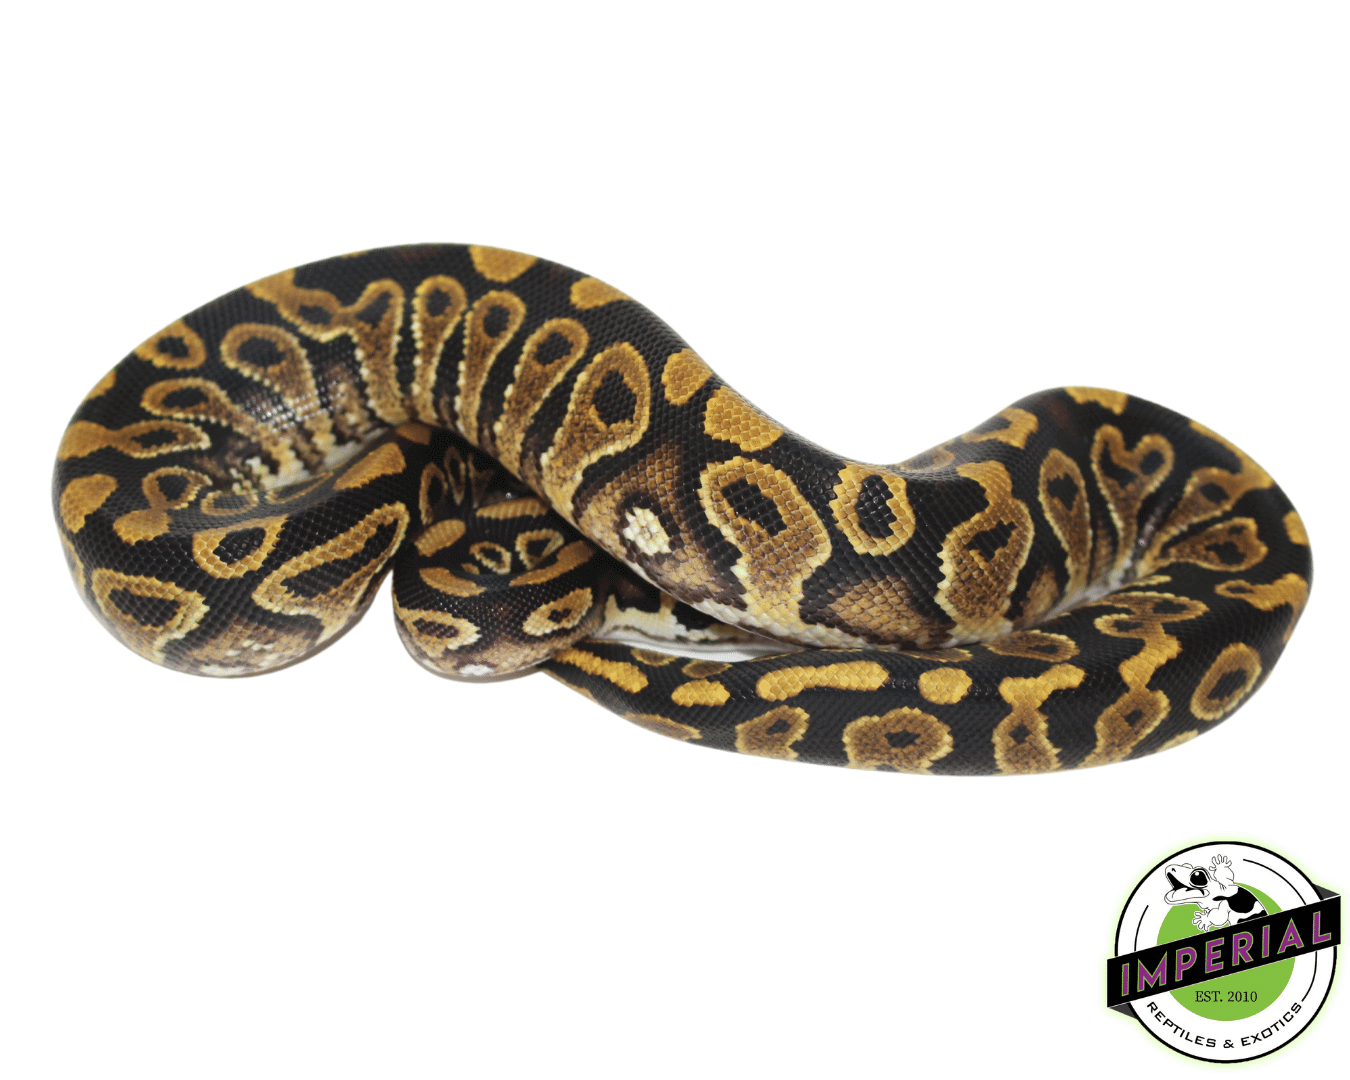 jedi yellowbelly ball python for sale, buy reptiles online